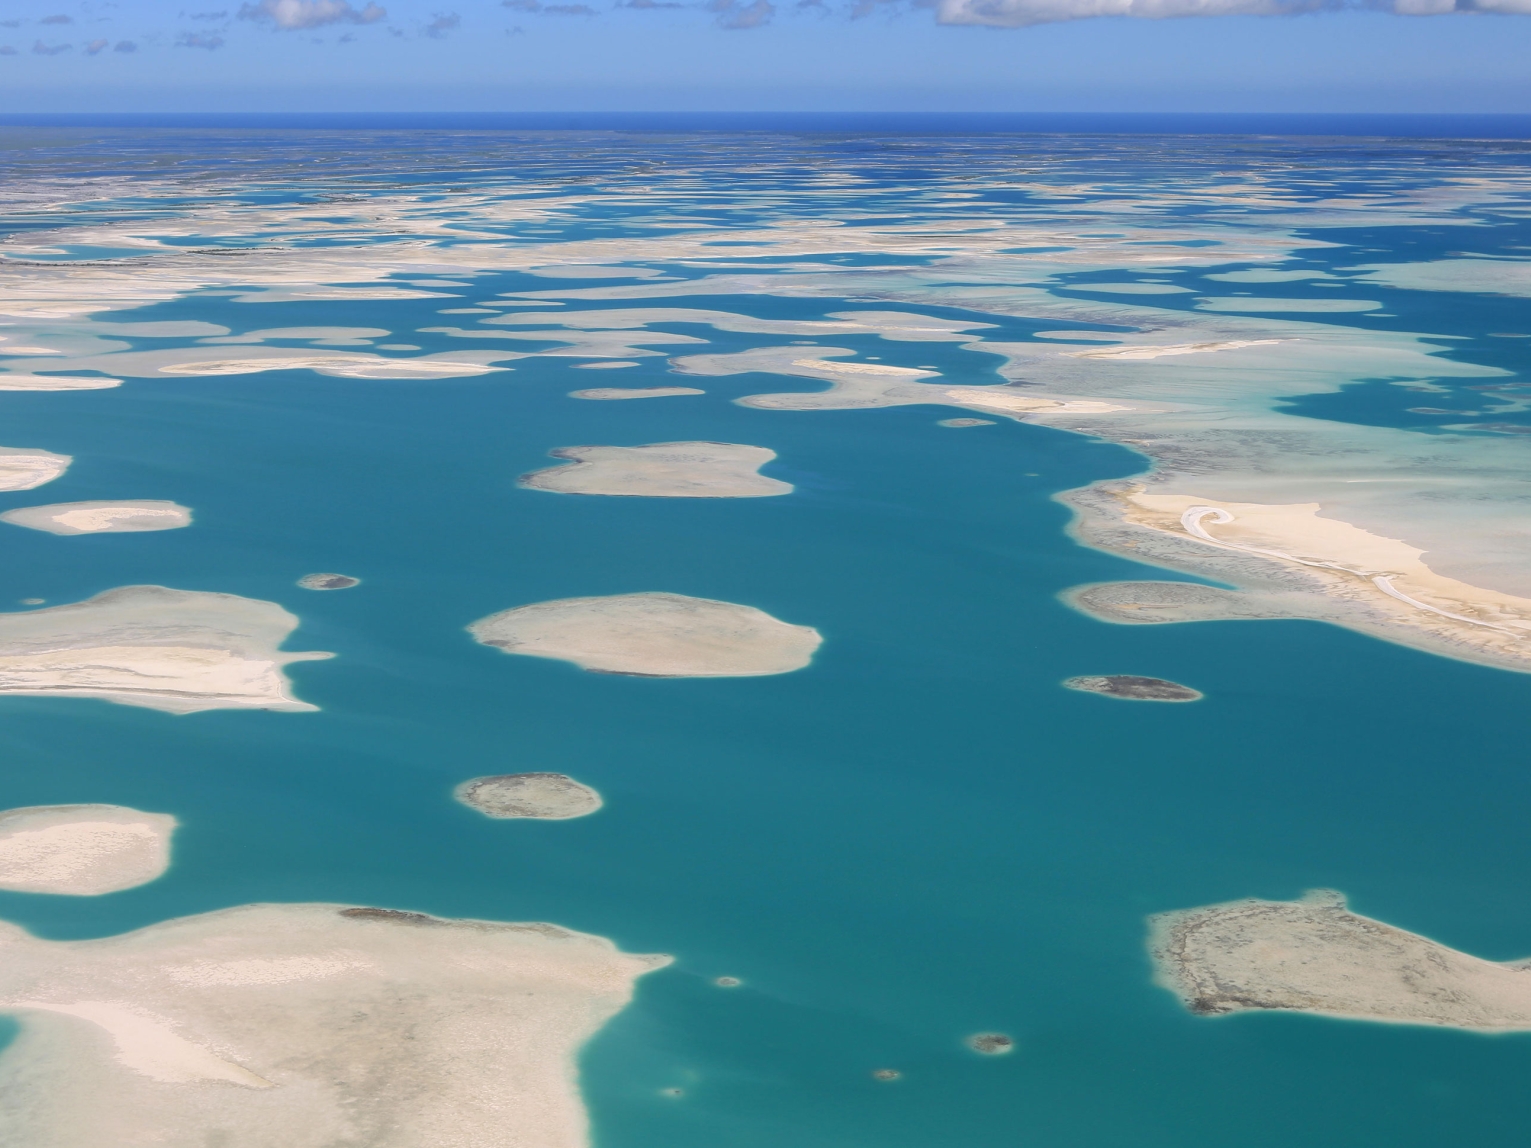 Aerial view of the lagoons of Kirimati, also known as Christmas Island, part of the Republic of Kiribati in the central Pacific Ocean.